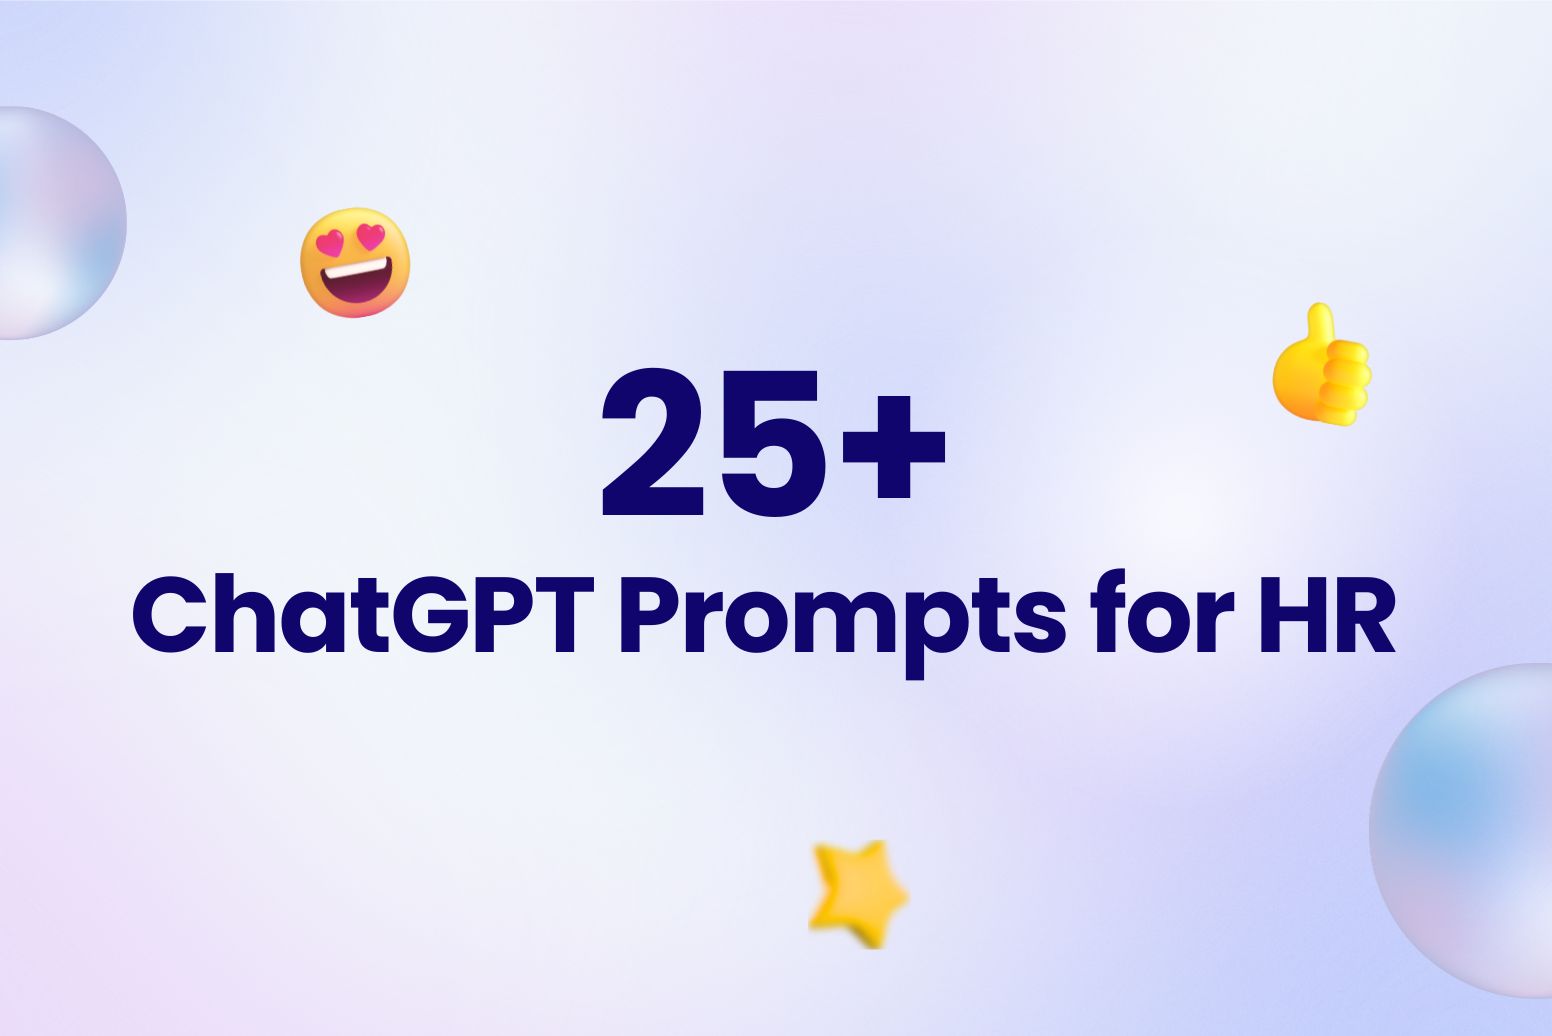 25+ ChatGPT Prompts for HR